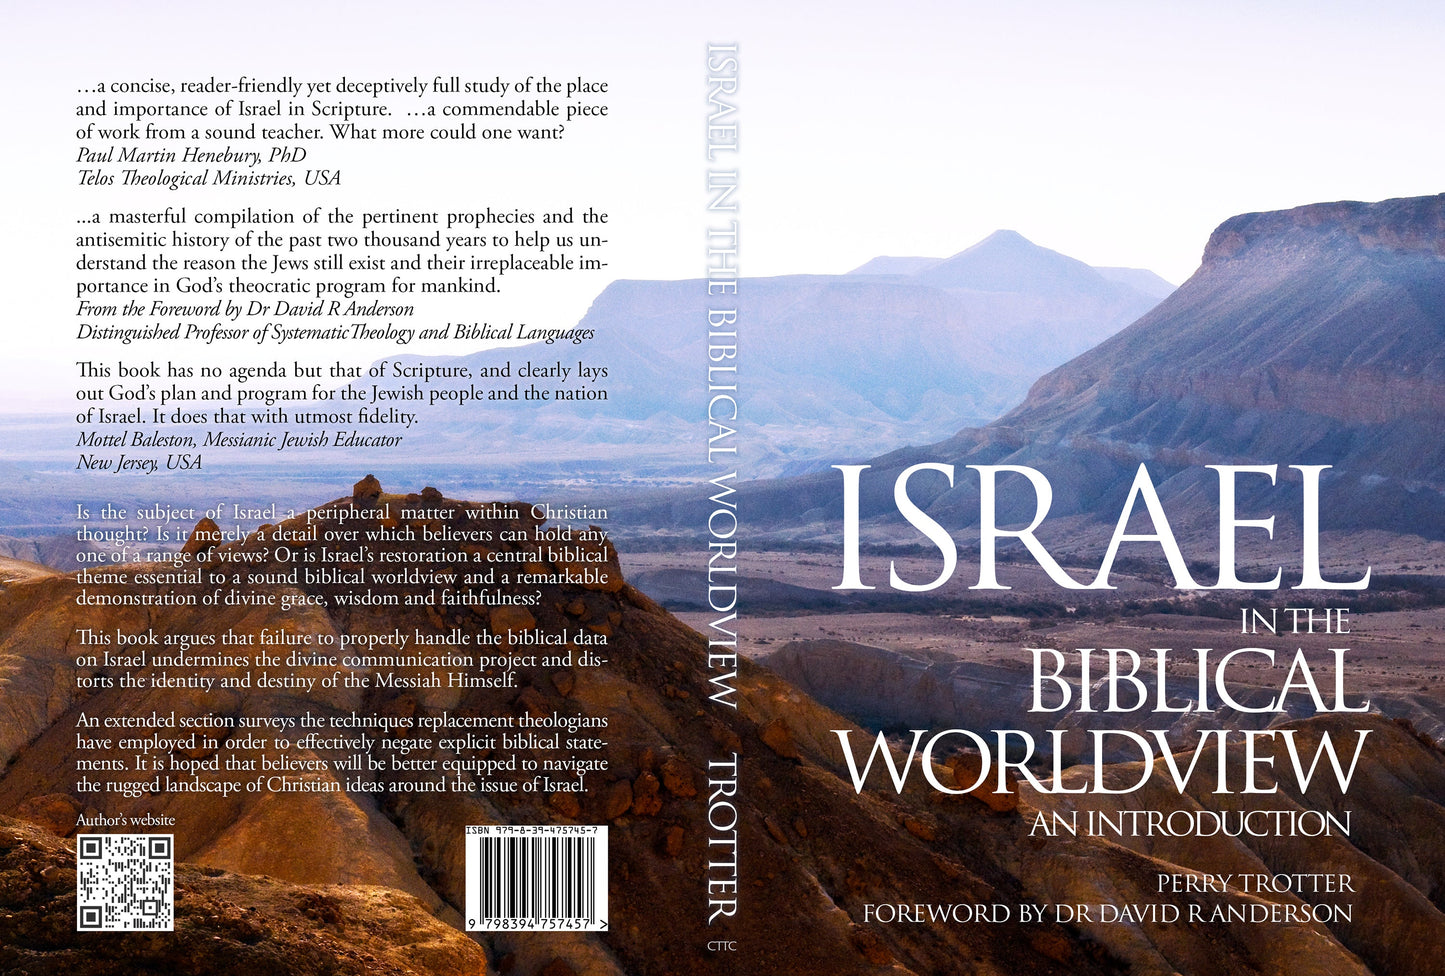 Israel In The Biblical Worldview: An Introduction